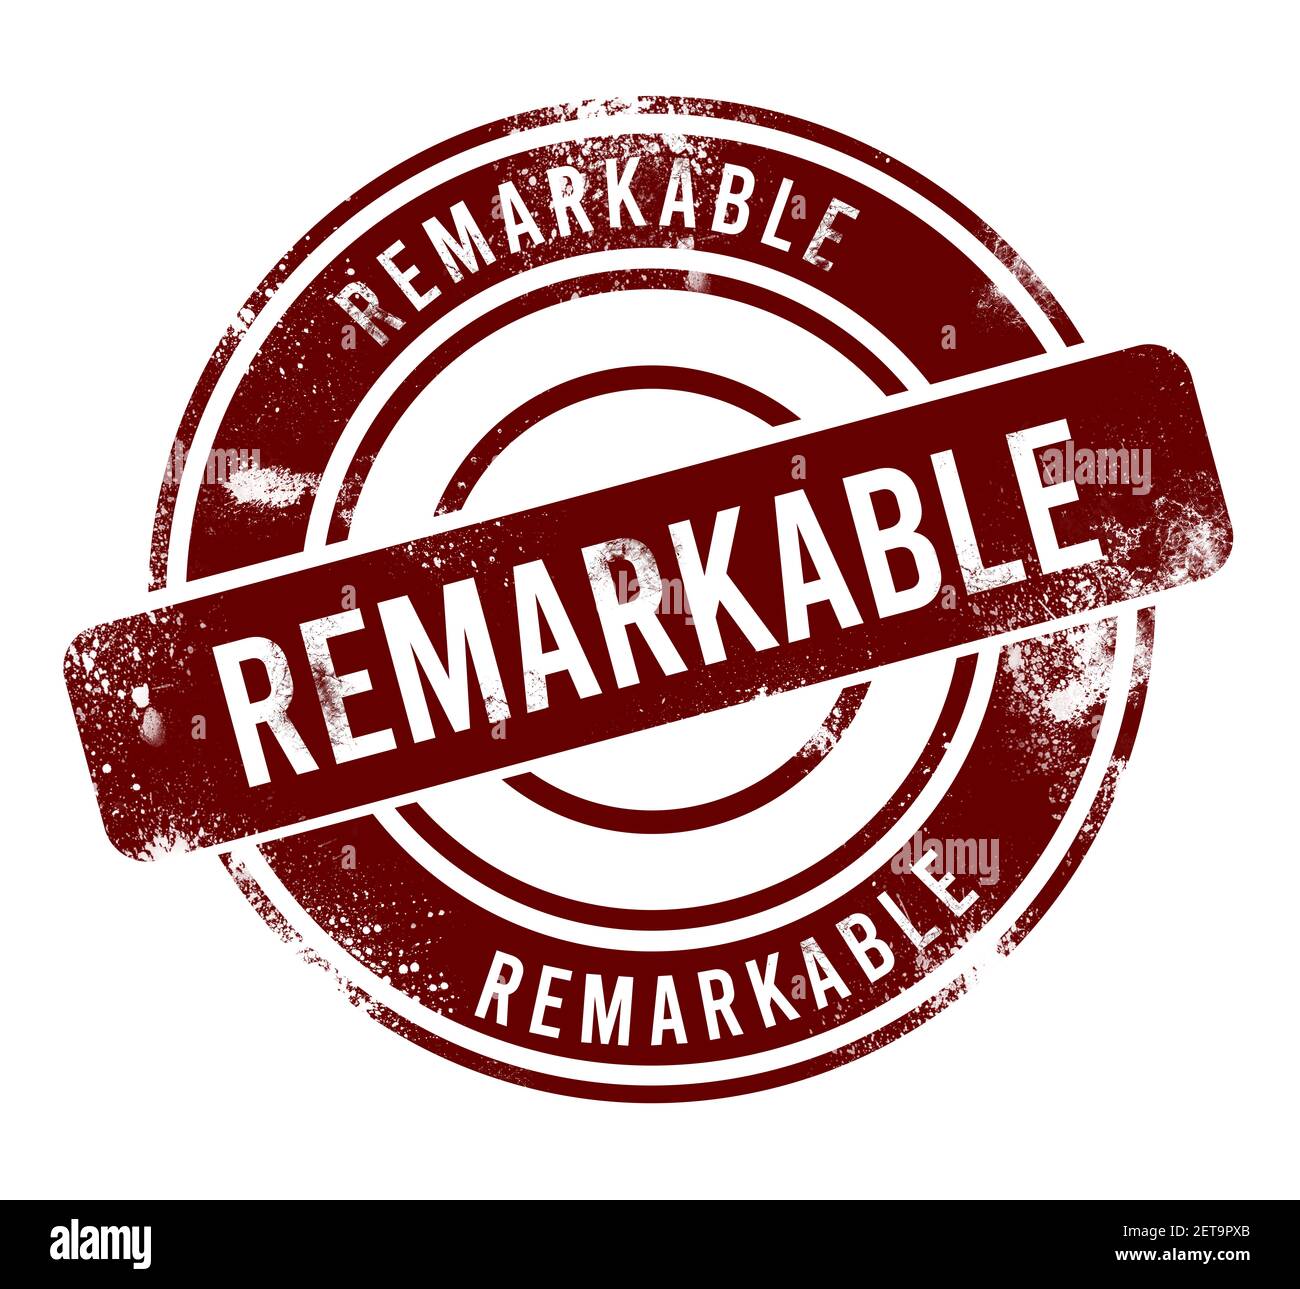 Remarkable - red round grunge button, stamp Stock Photo - Alamy